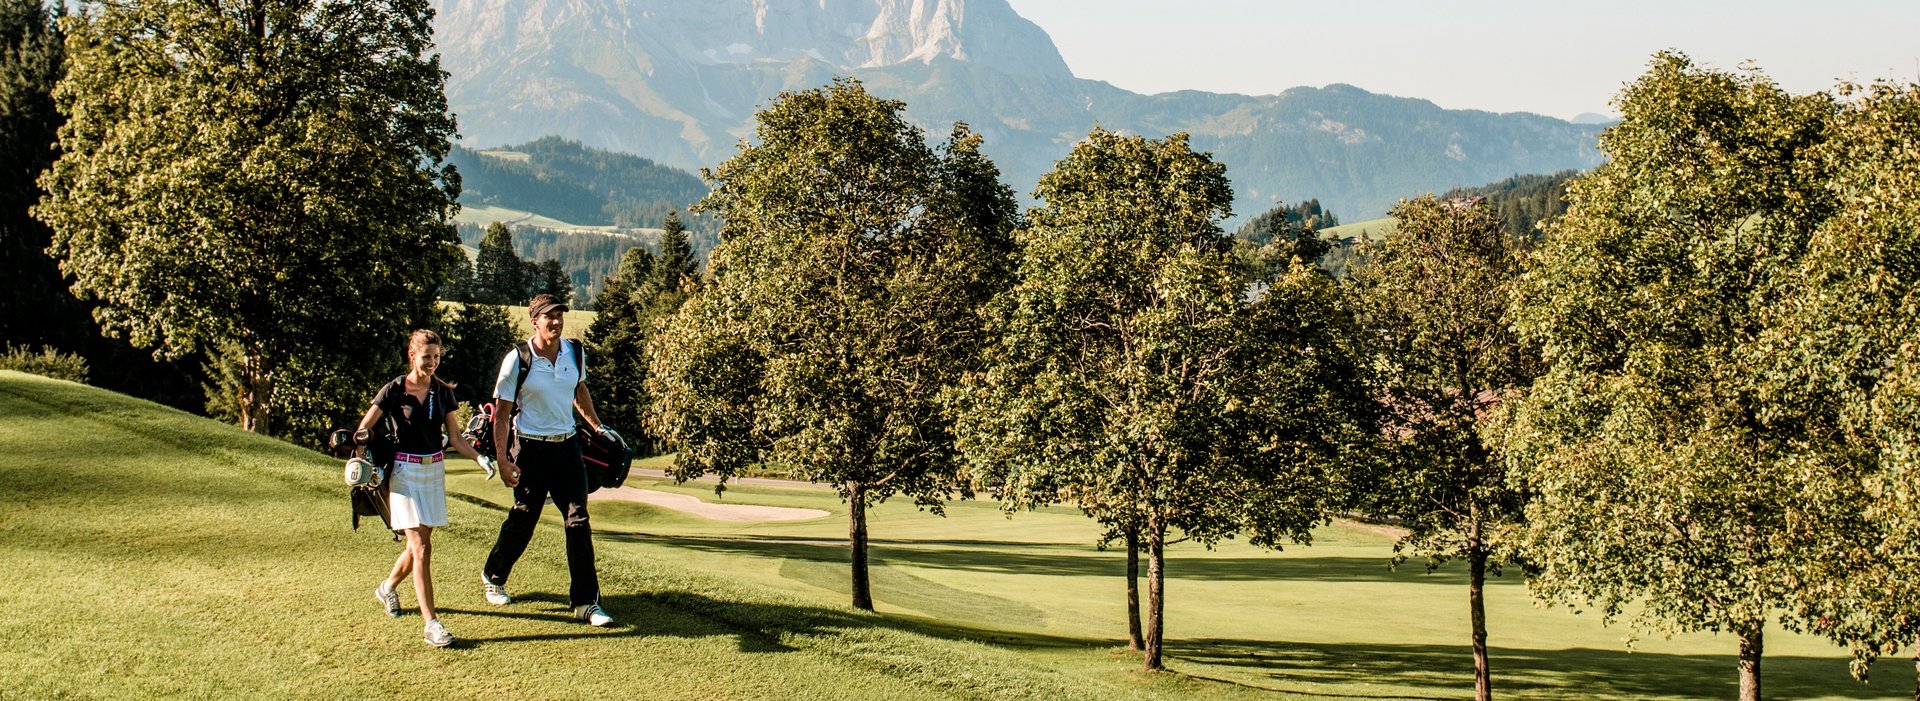 Golf course Schwarzsee